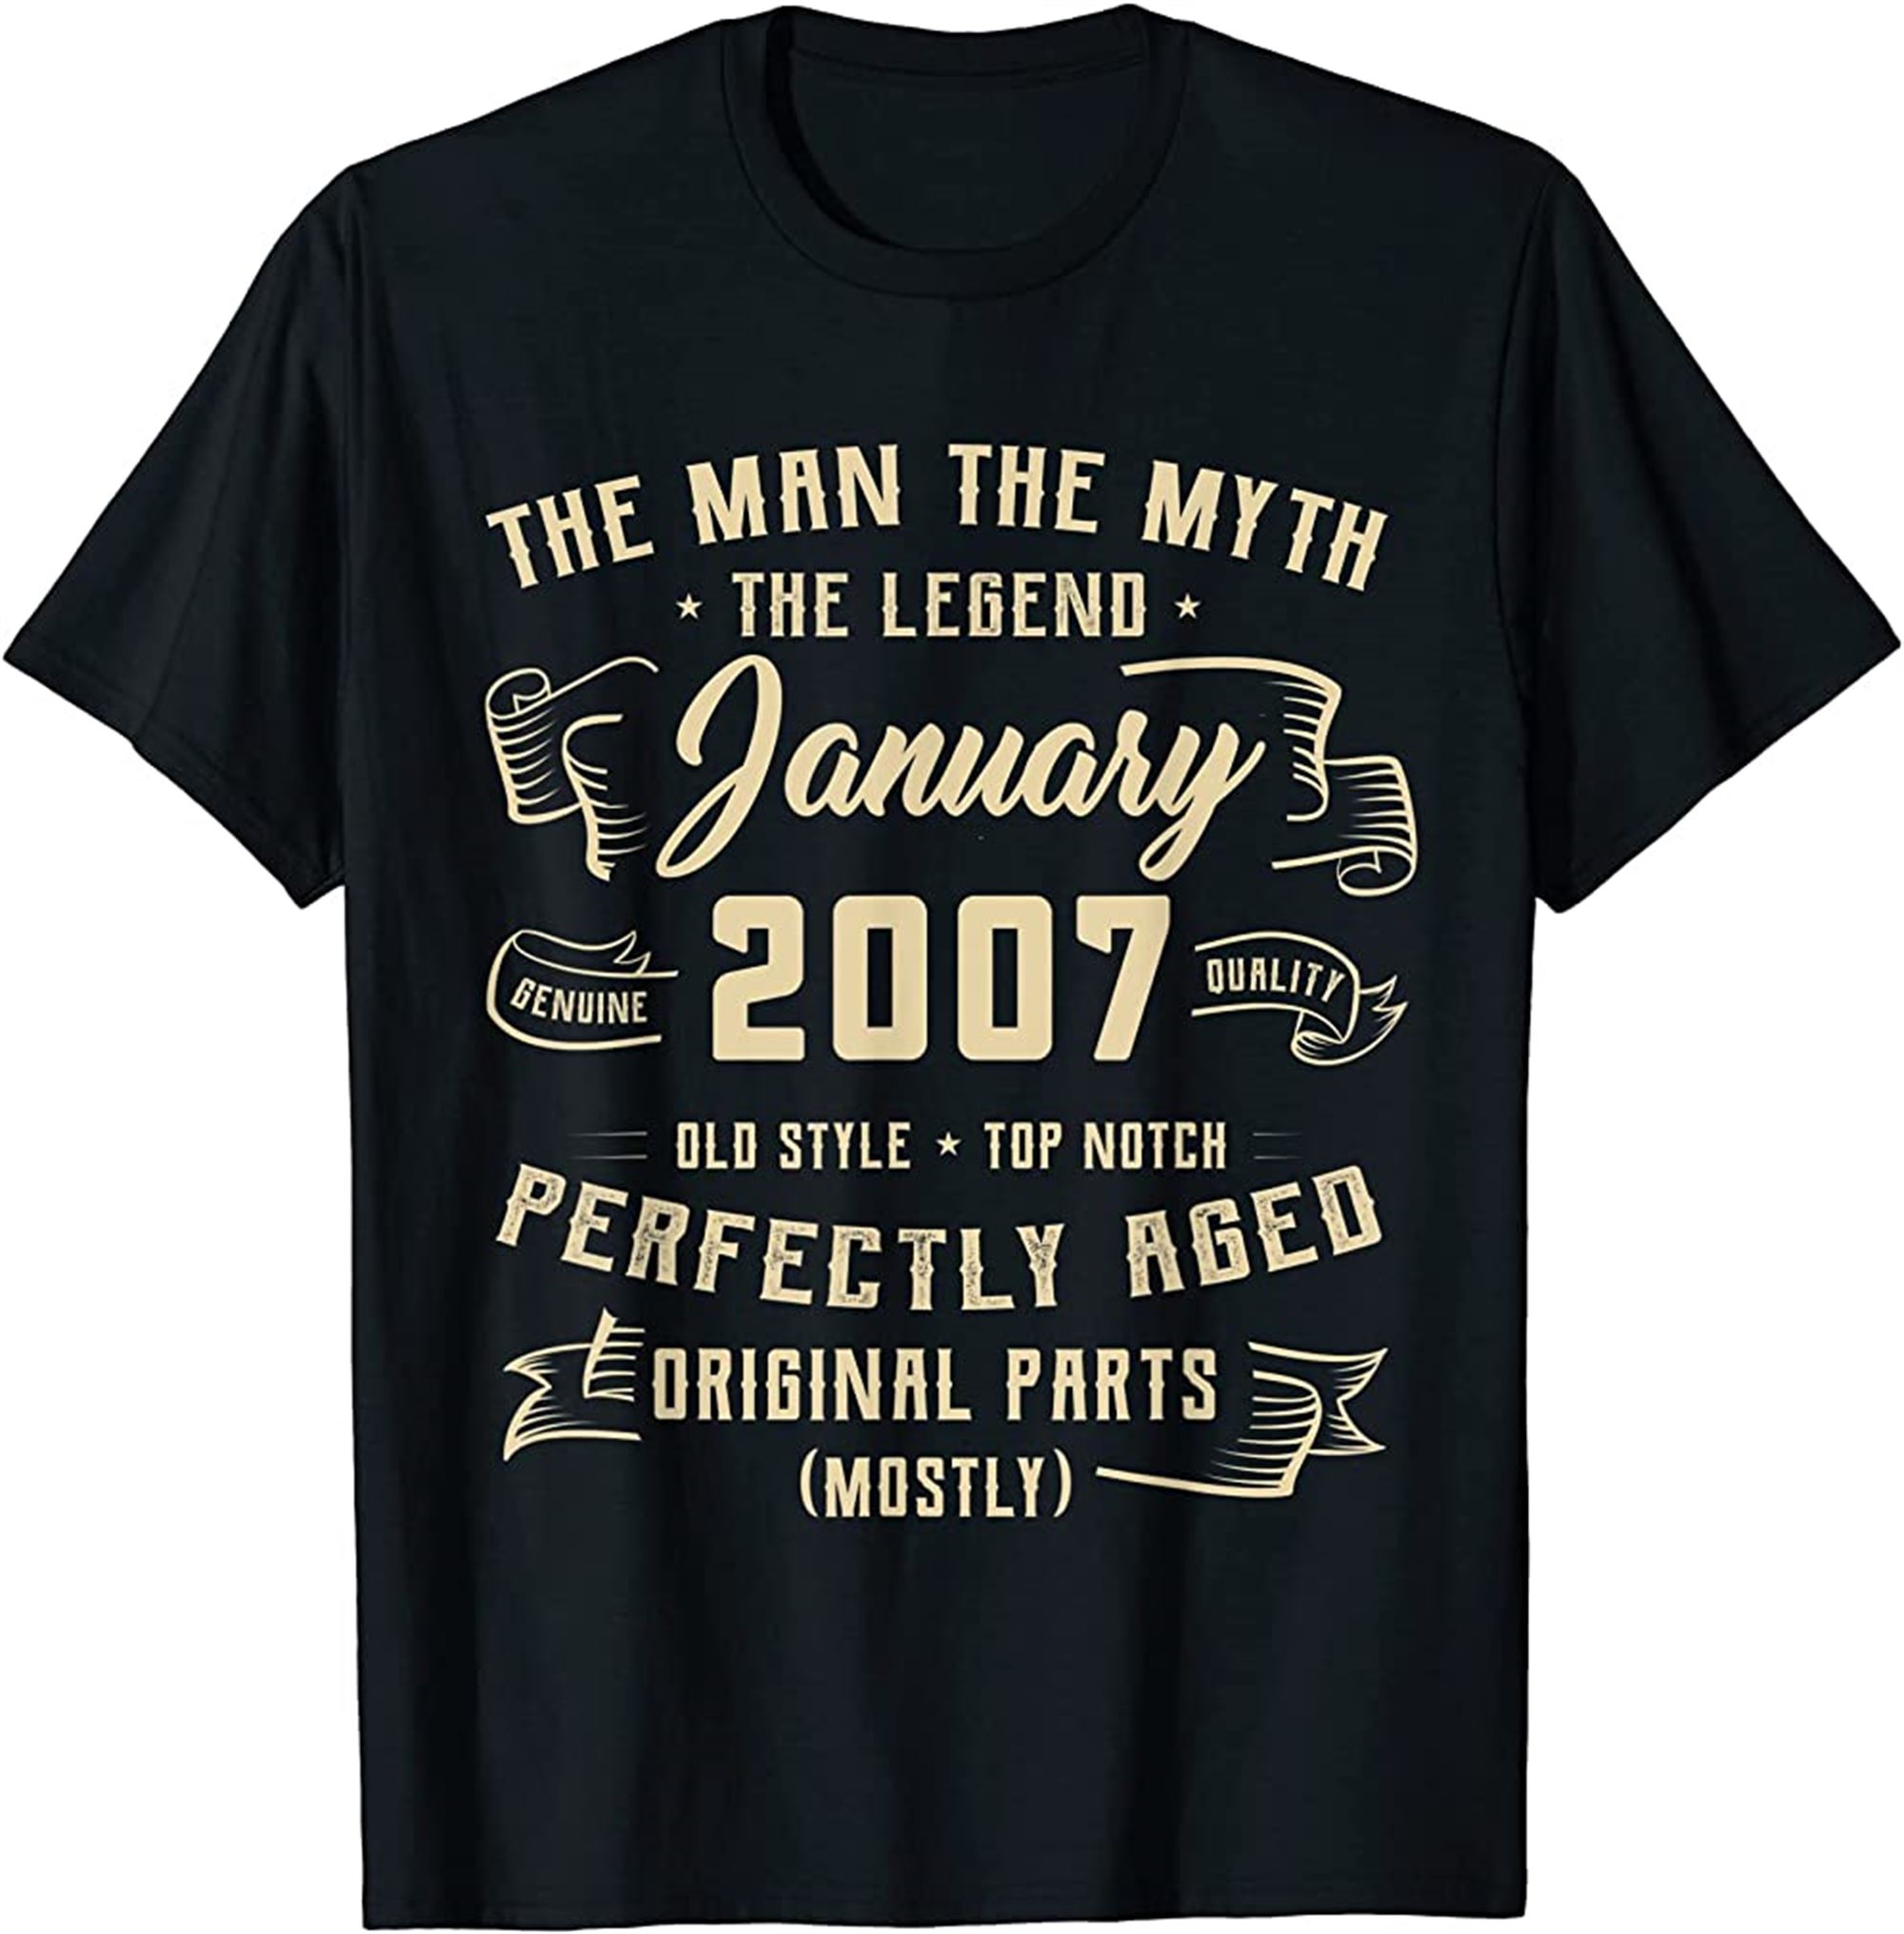 Man Myth Legend January 2007 15th Birthday Gift 15 Years Old T-shirt Full Size Up To 5xl